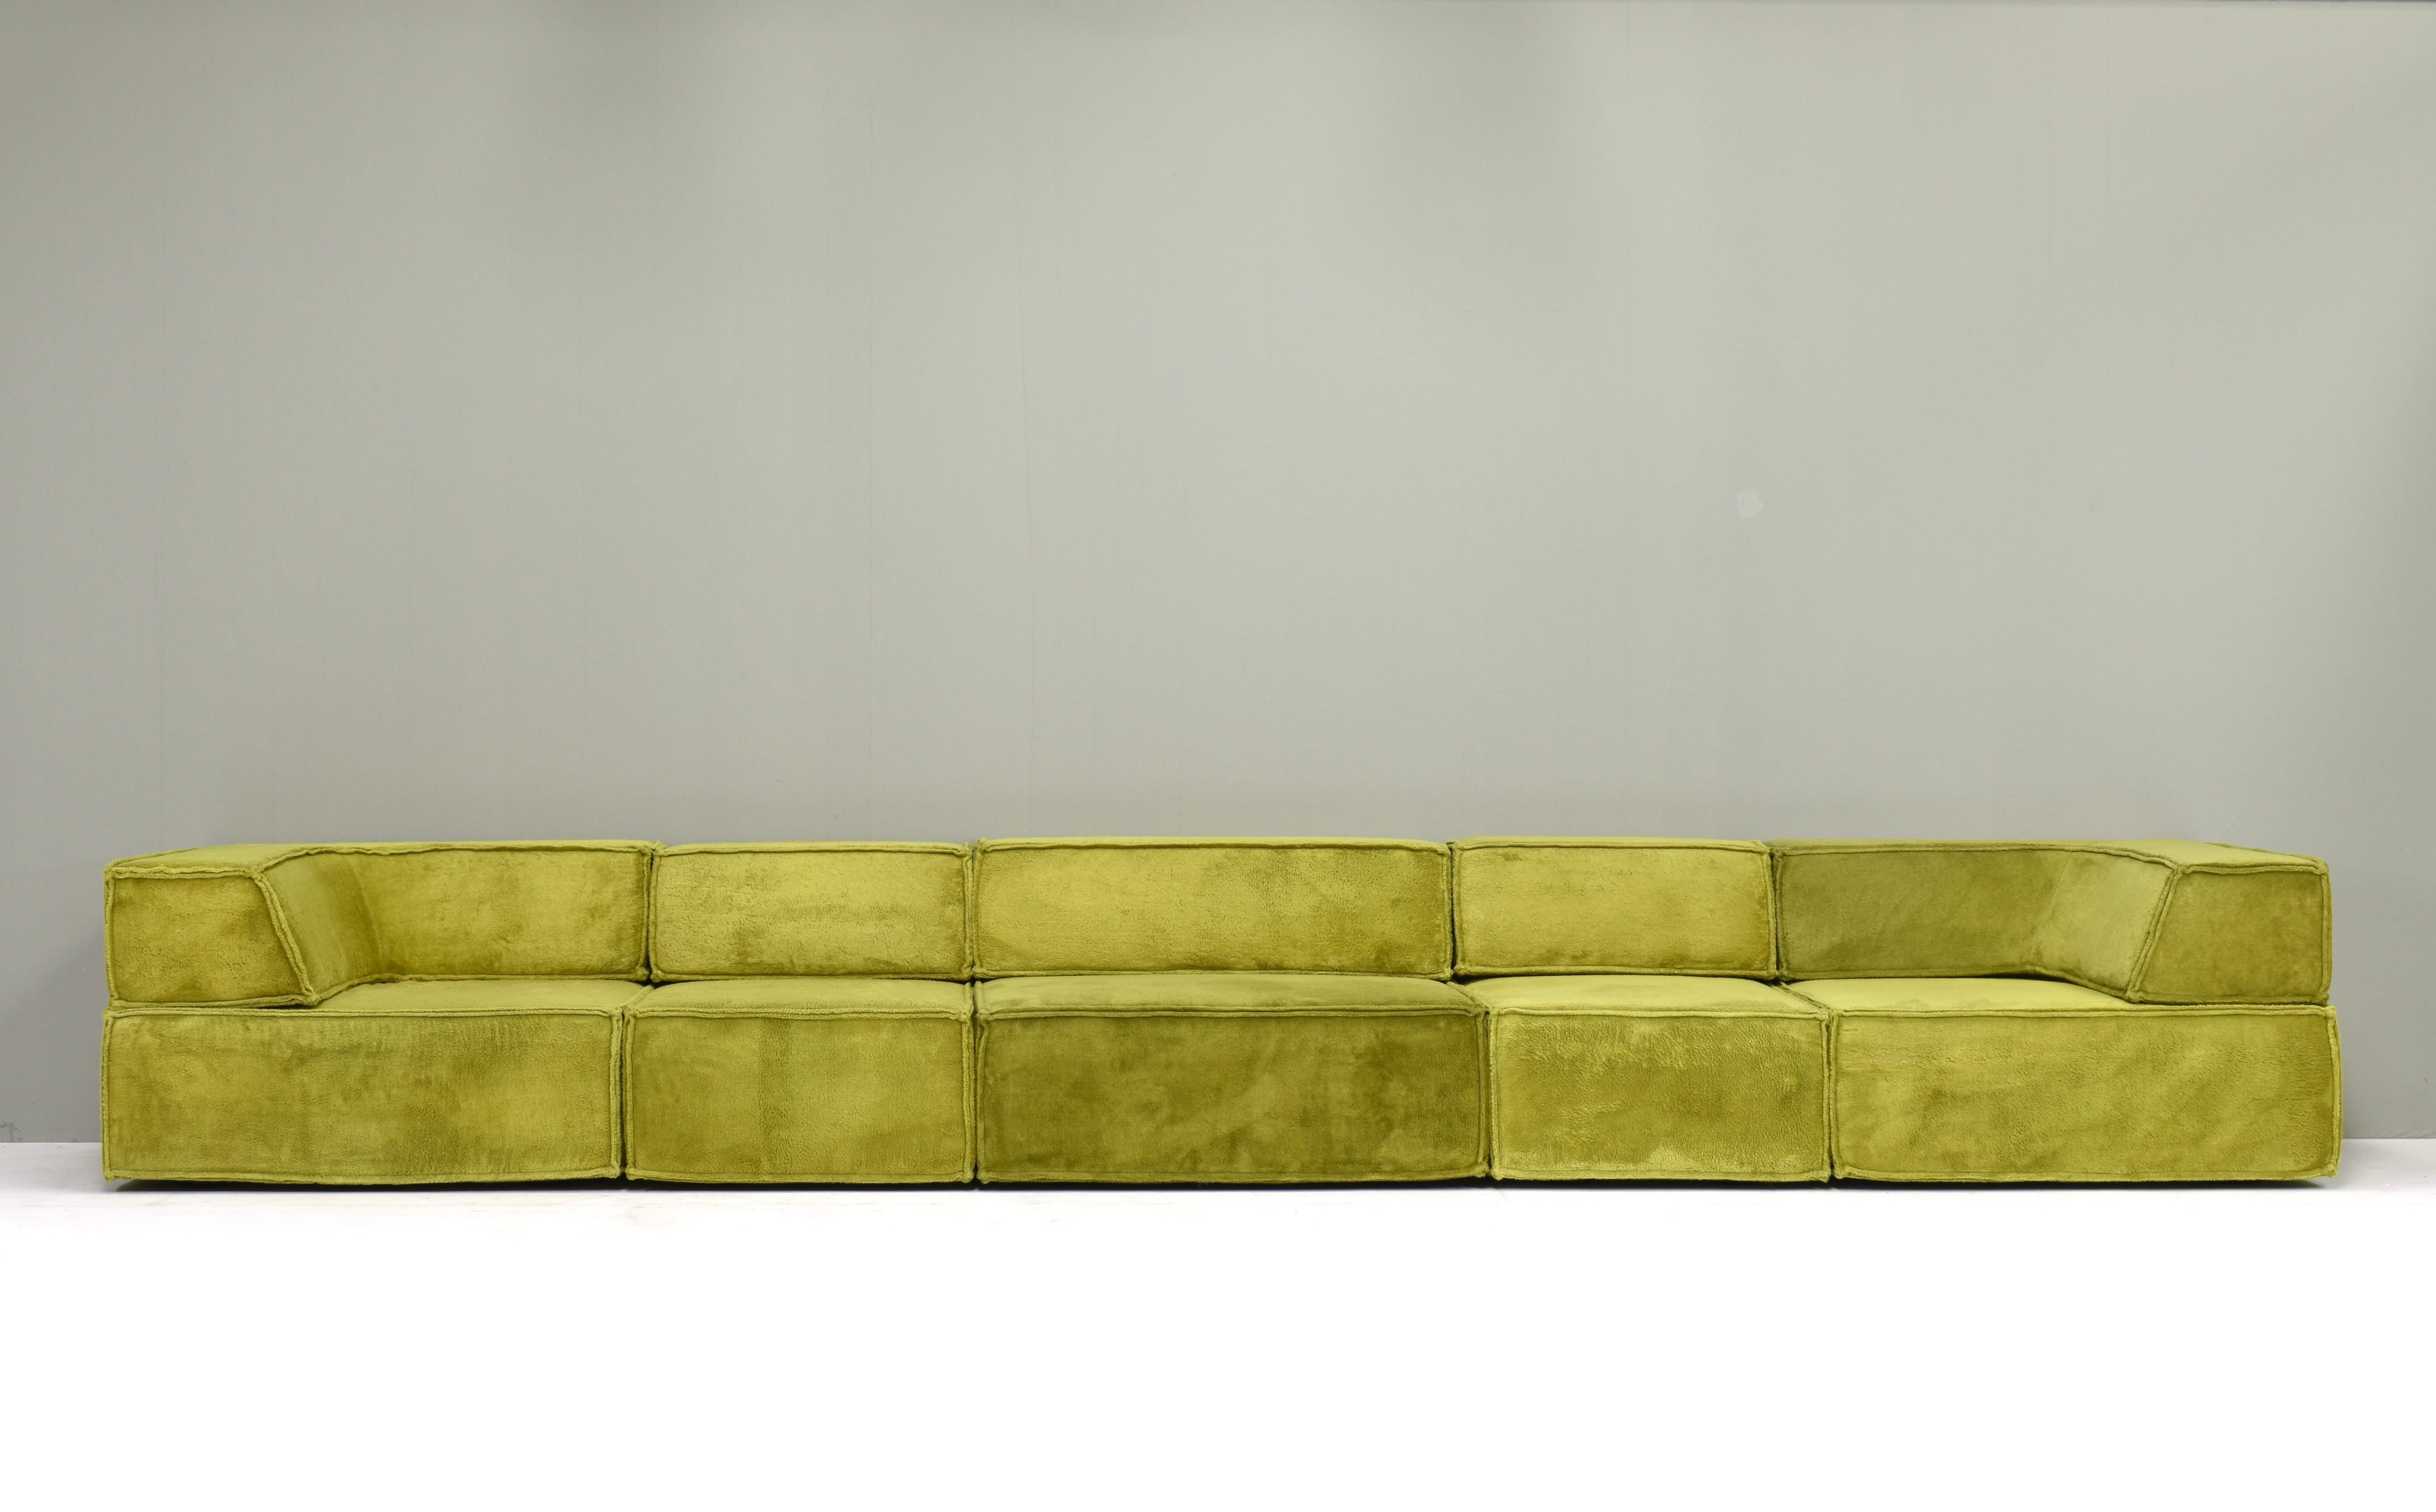 COR Trio Sectional Sofa by Team Form Ag for COR, Germany / Switzerland, 1972 In Good Condition In Pijnacker, Zuid-Holland